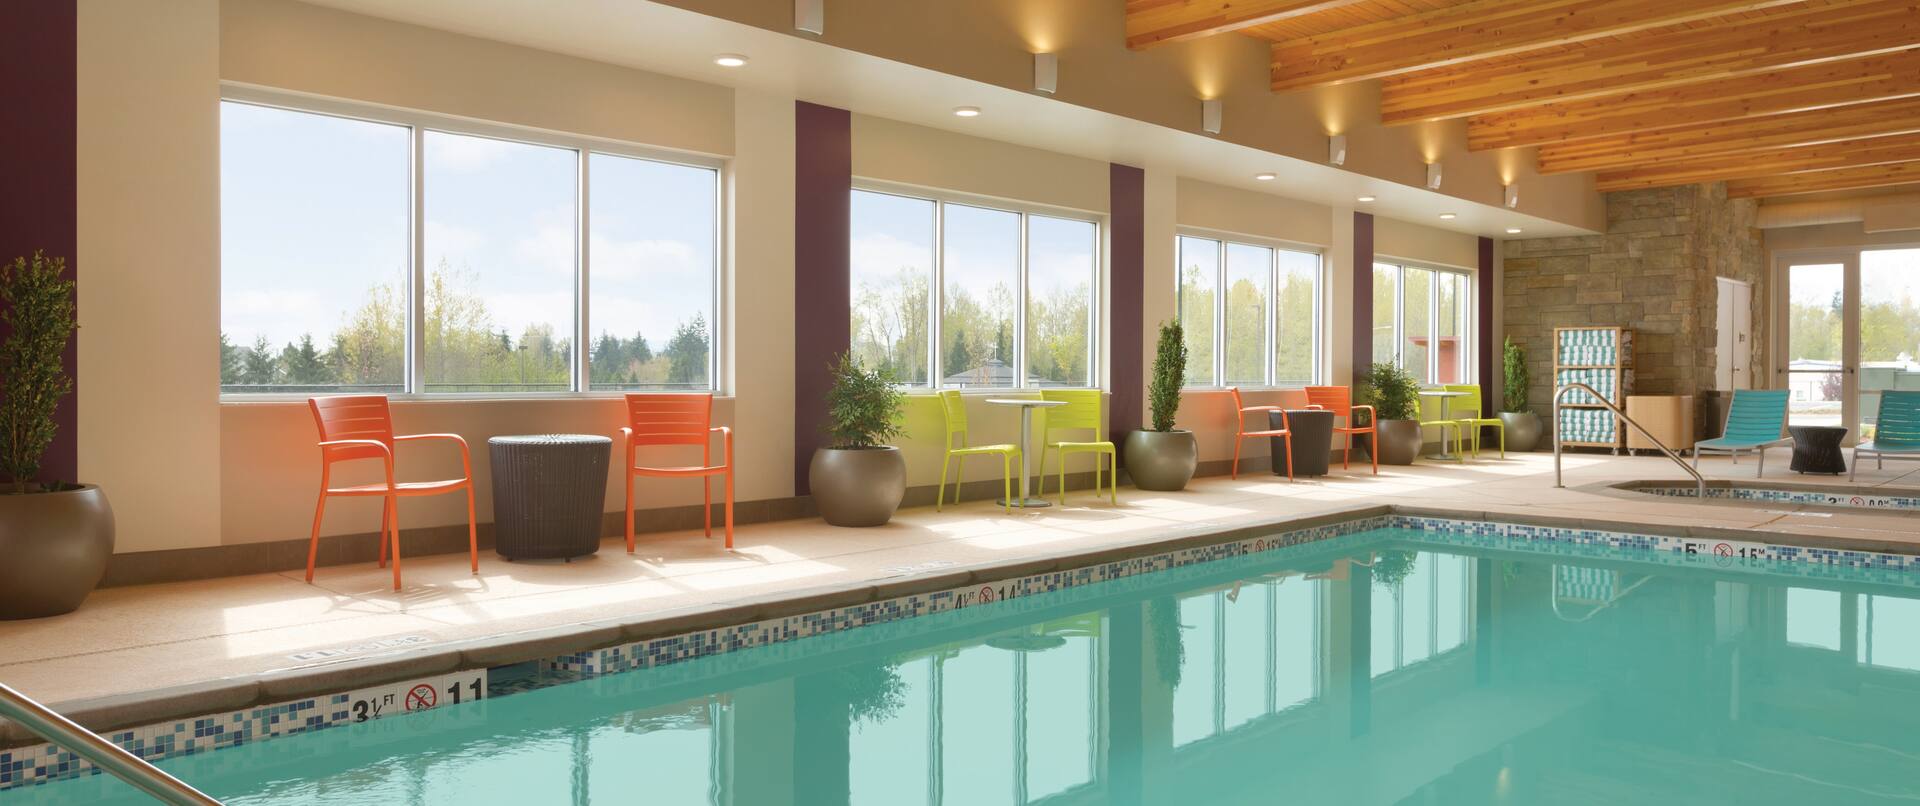 Home2 Suites by Hilton Bellingham Airport Hotel, WA - Indoor Pool